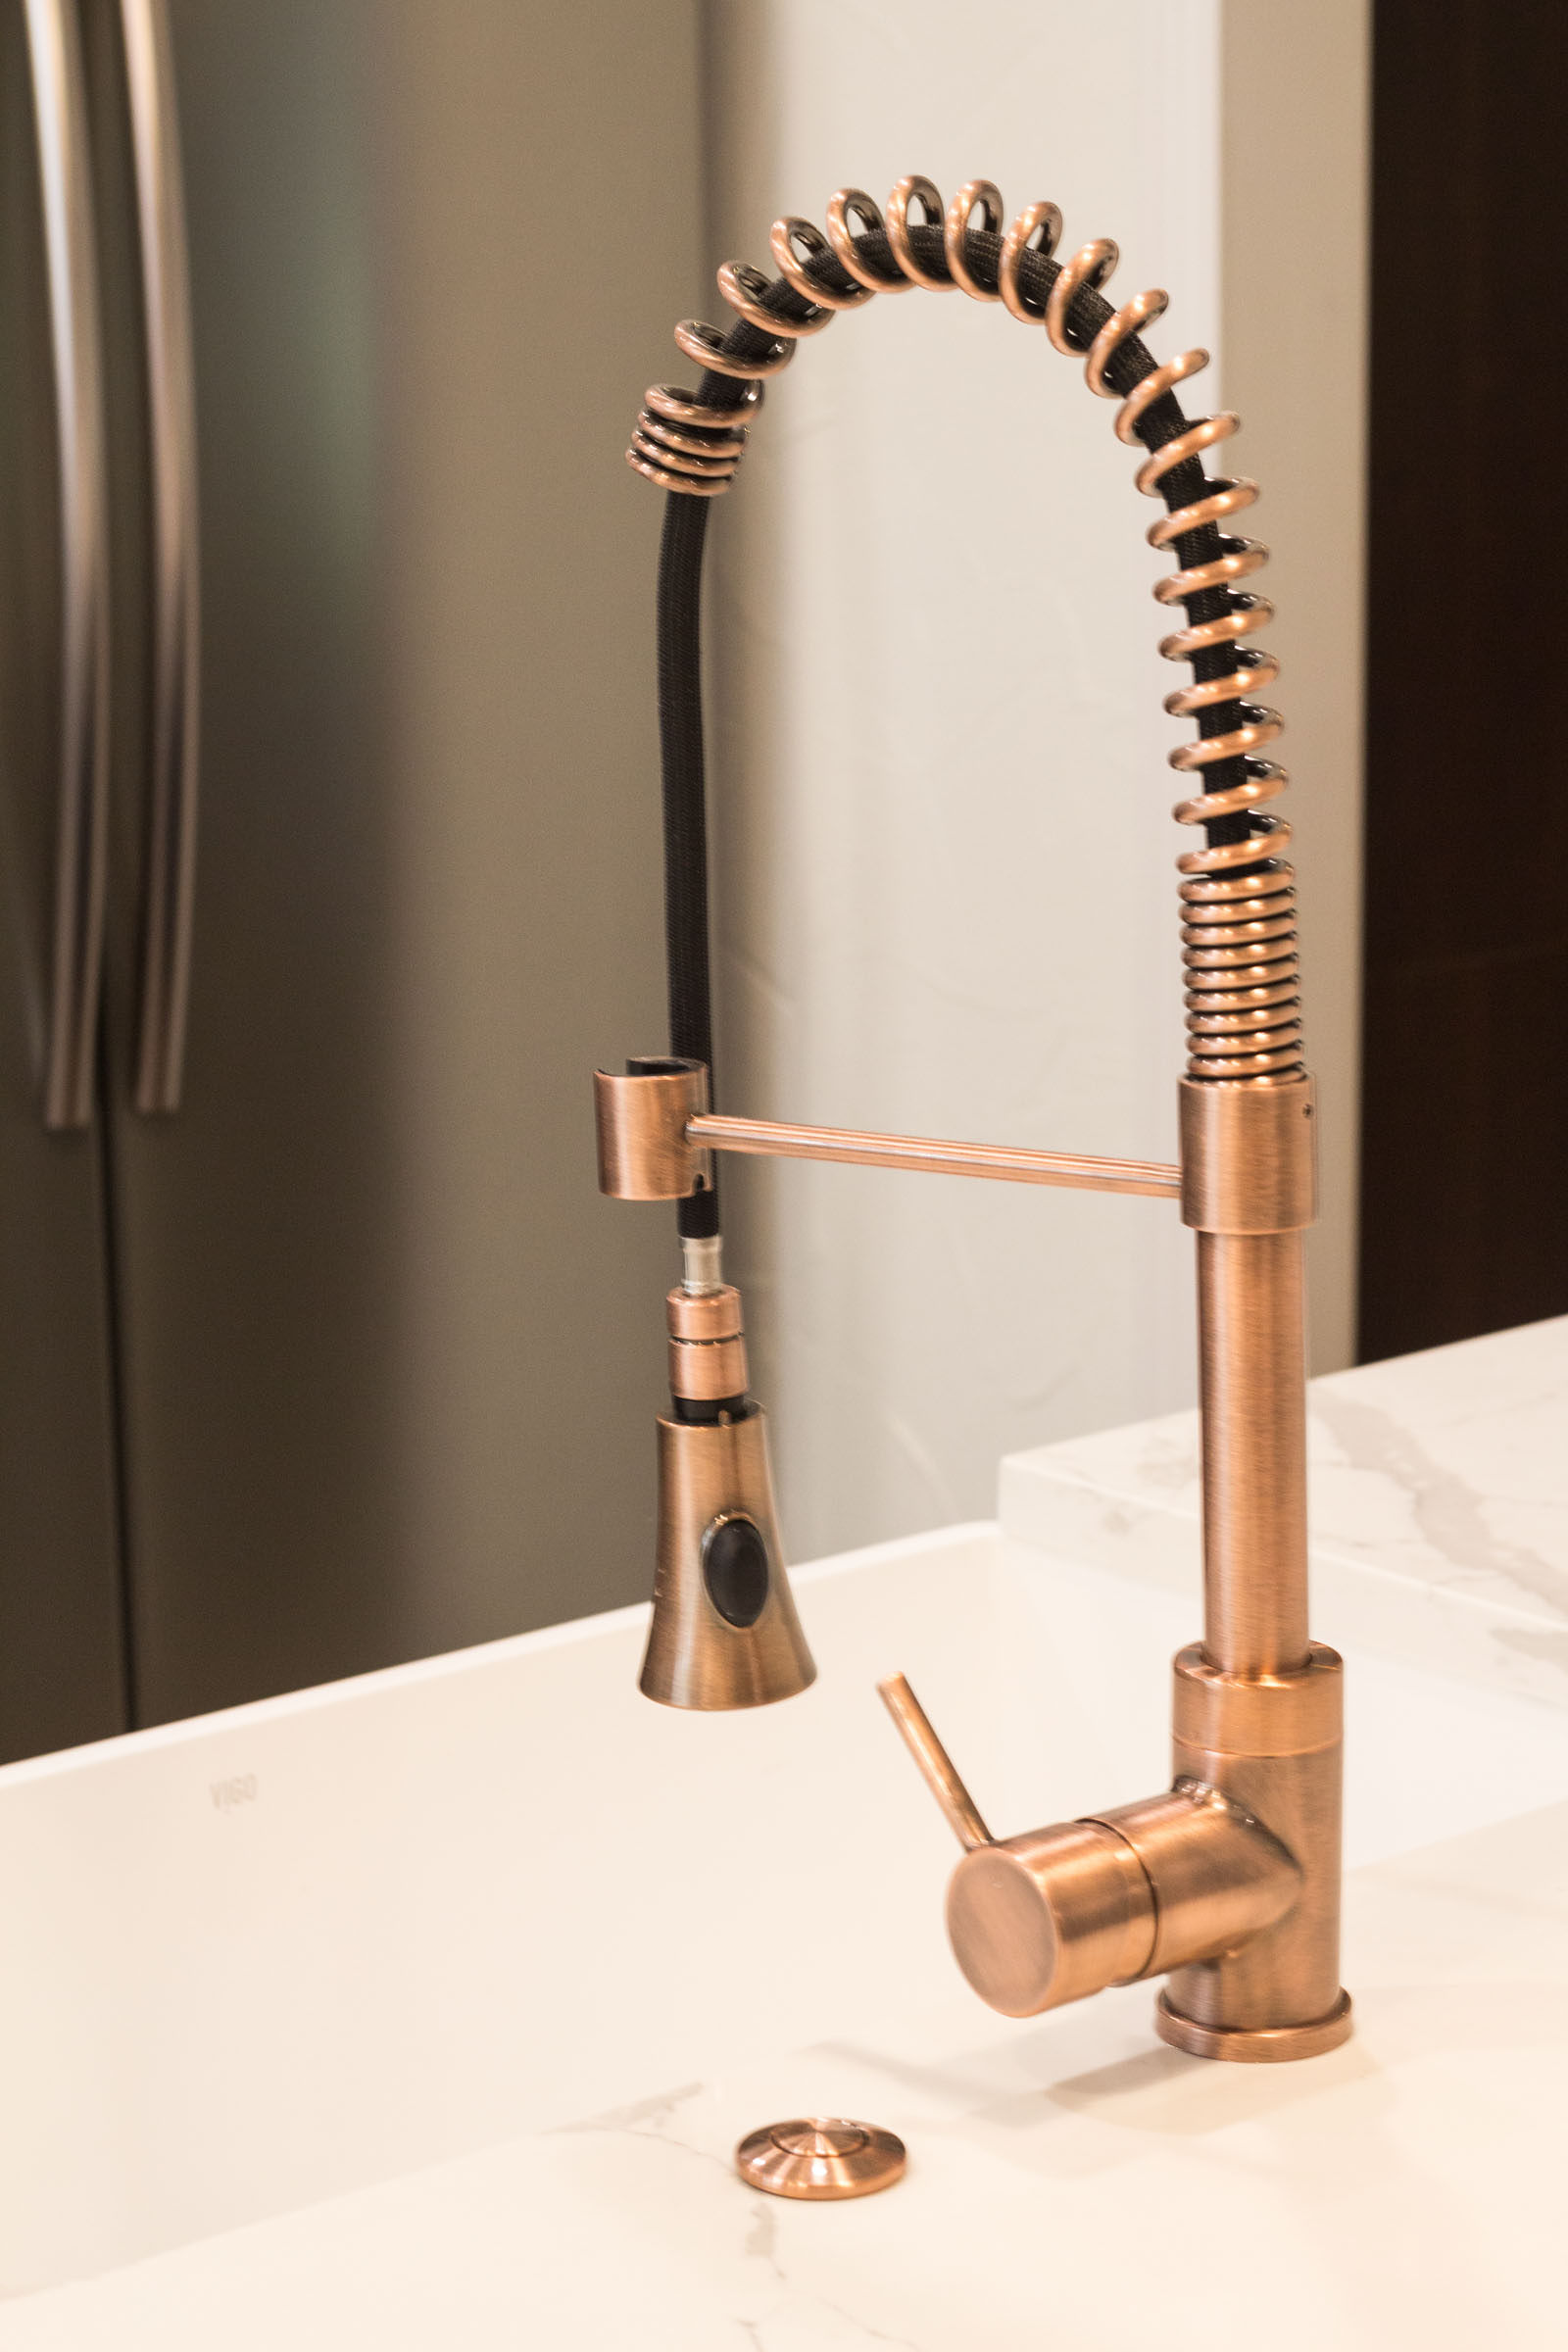 Copper swan neck sink faucet with built in disposal button